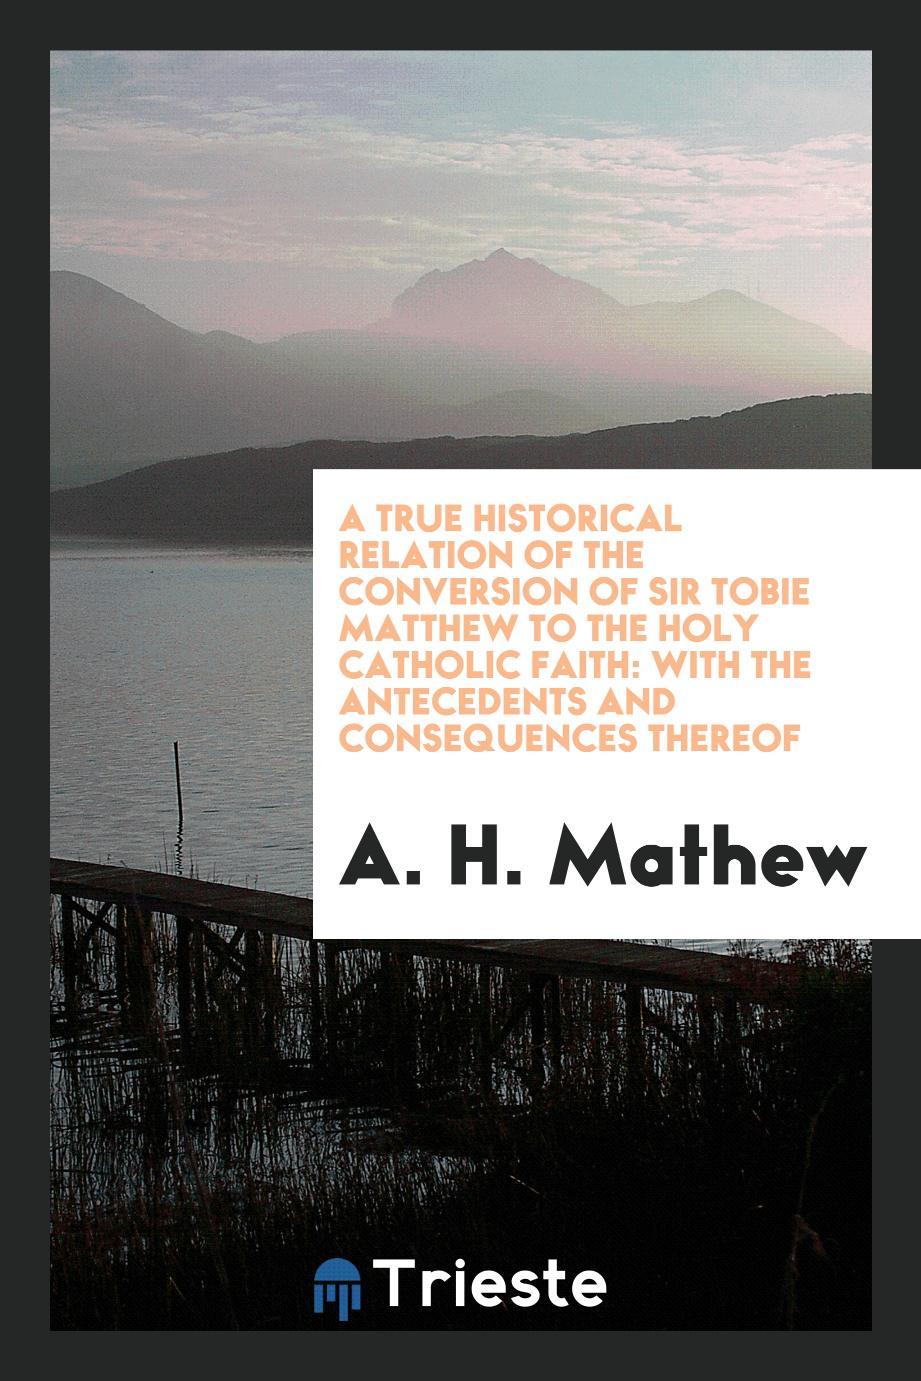 A true historical relation of the conversion of Sir Tobie Matthew to the Holy Catholic faith: with the antecedents and consequences thereof